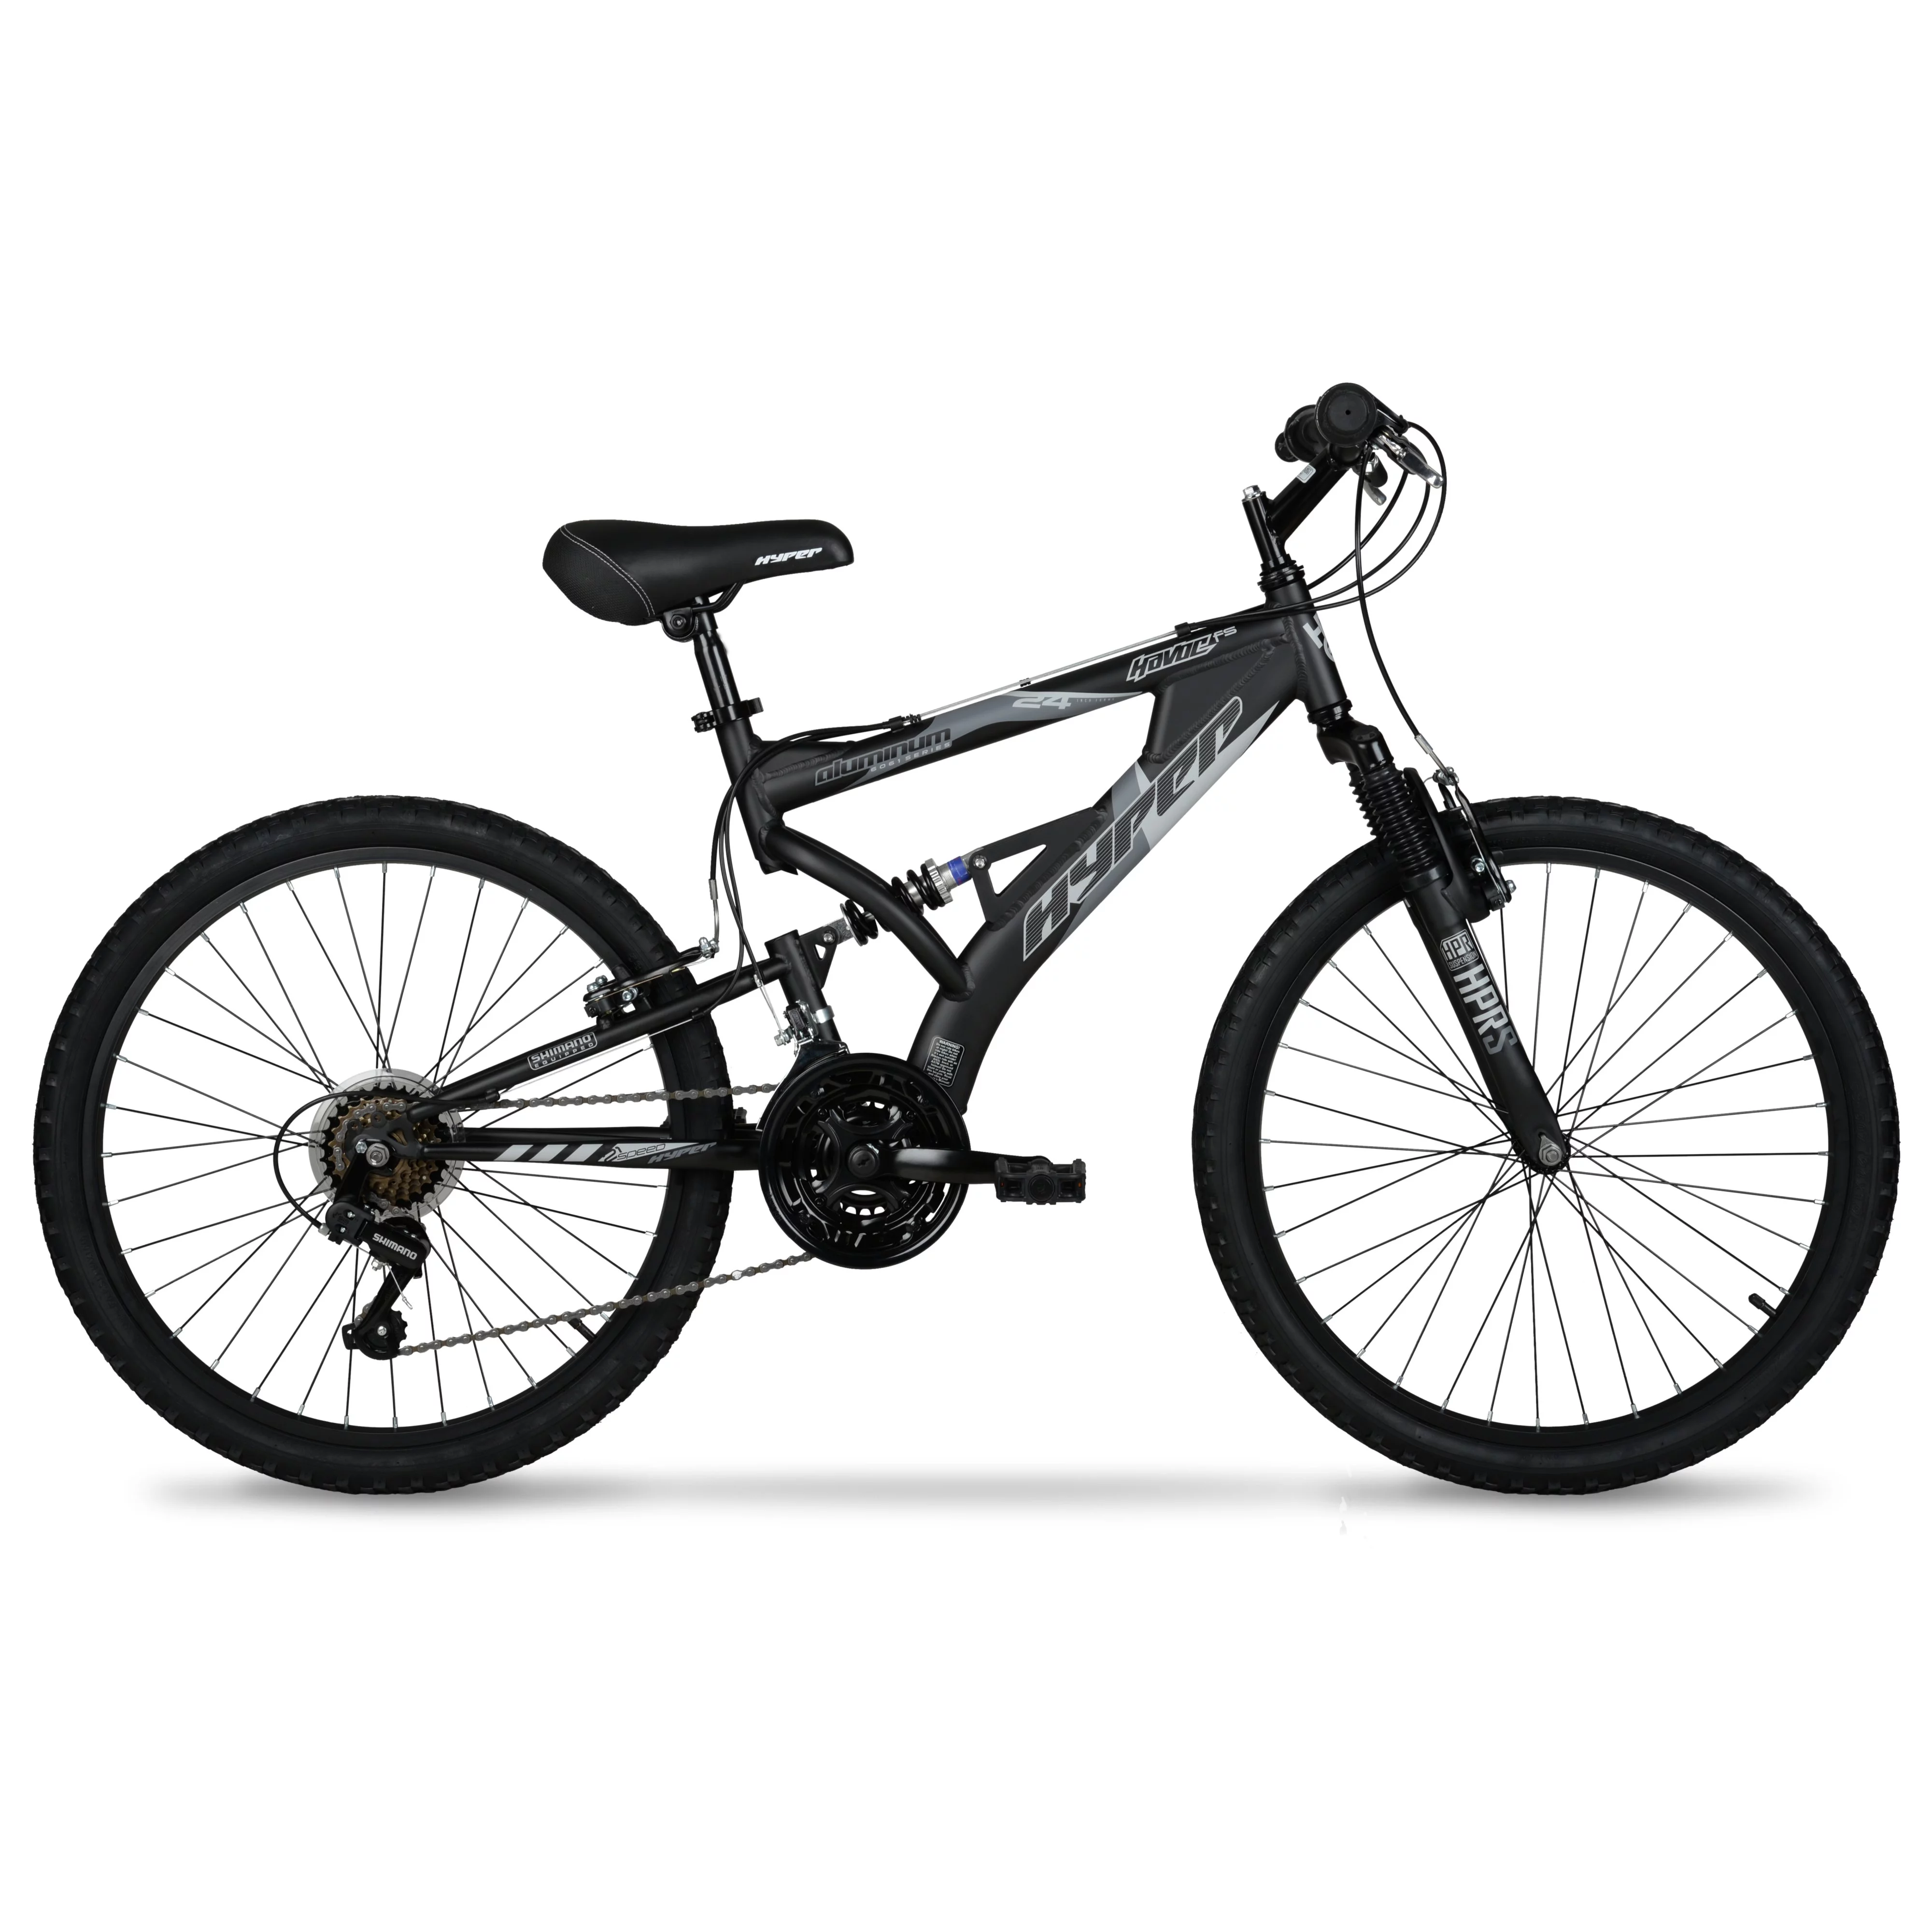 Hyper Bicycles 24" Boy's Havoc Mountain Bike, Black, Recommended Ages group 10 to 14 Years Old